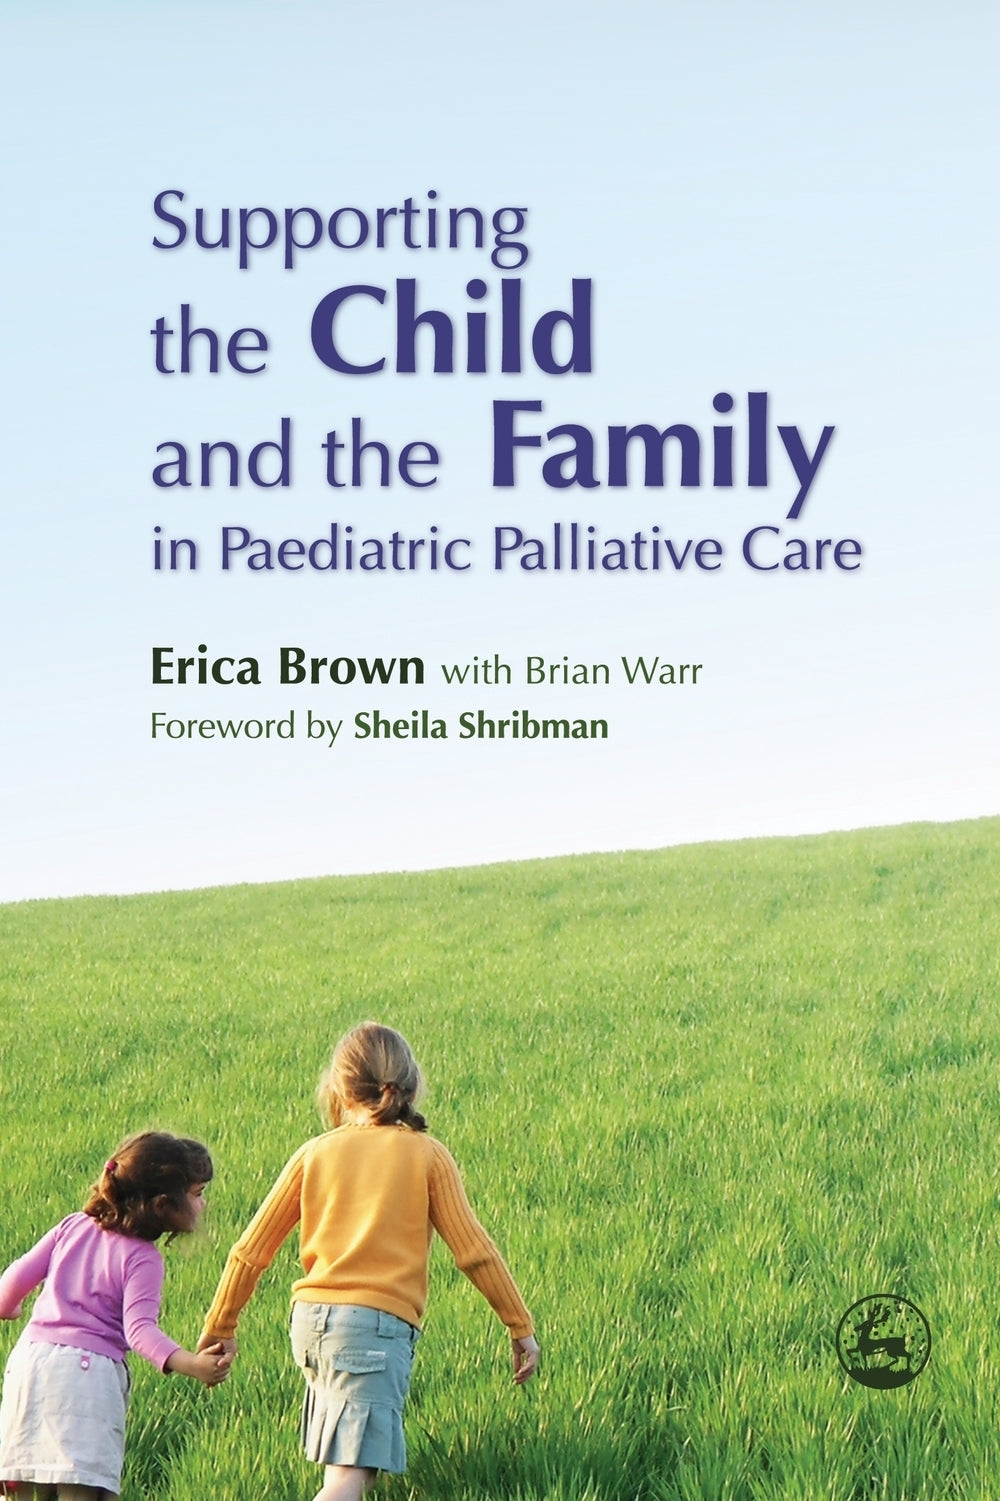 Supporting the Child and the Family in Paediatric Palliative Care by Erica Brown, Sheila Shribman, Brian Warr